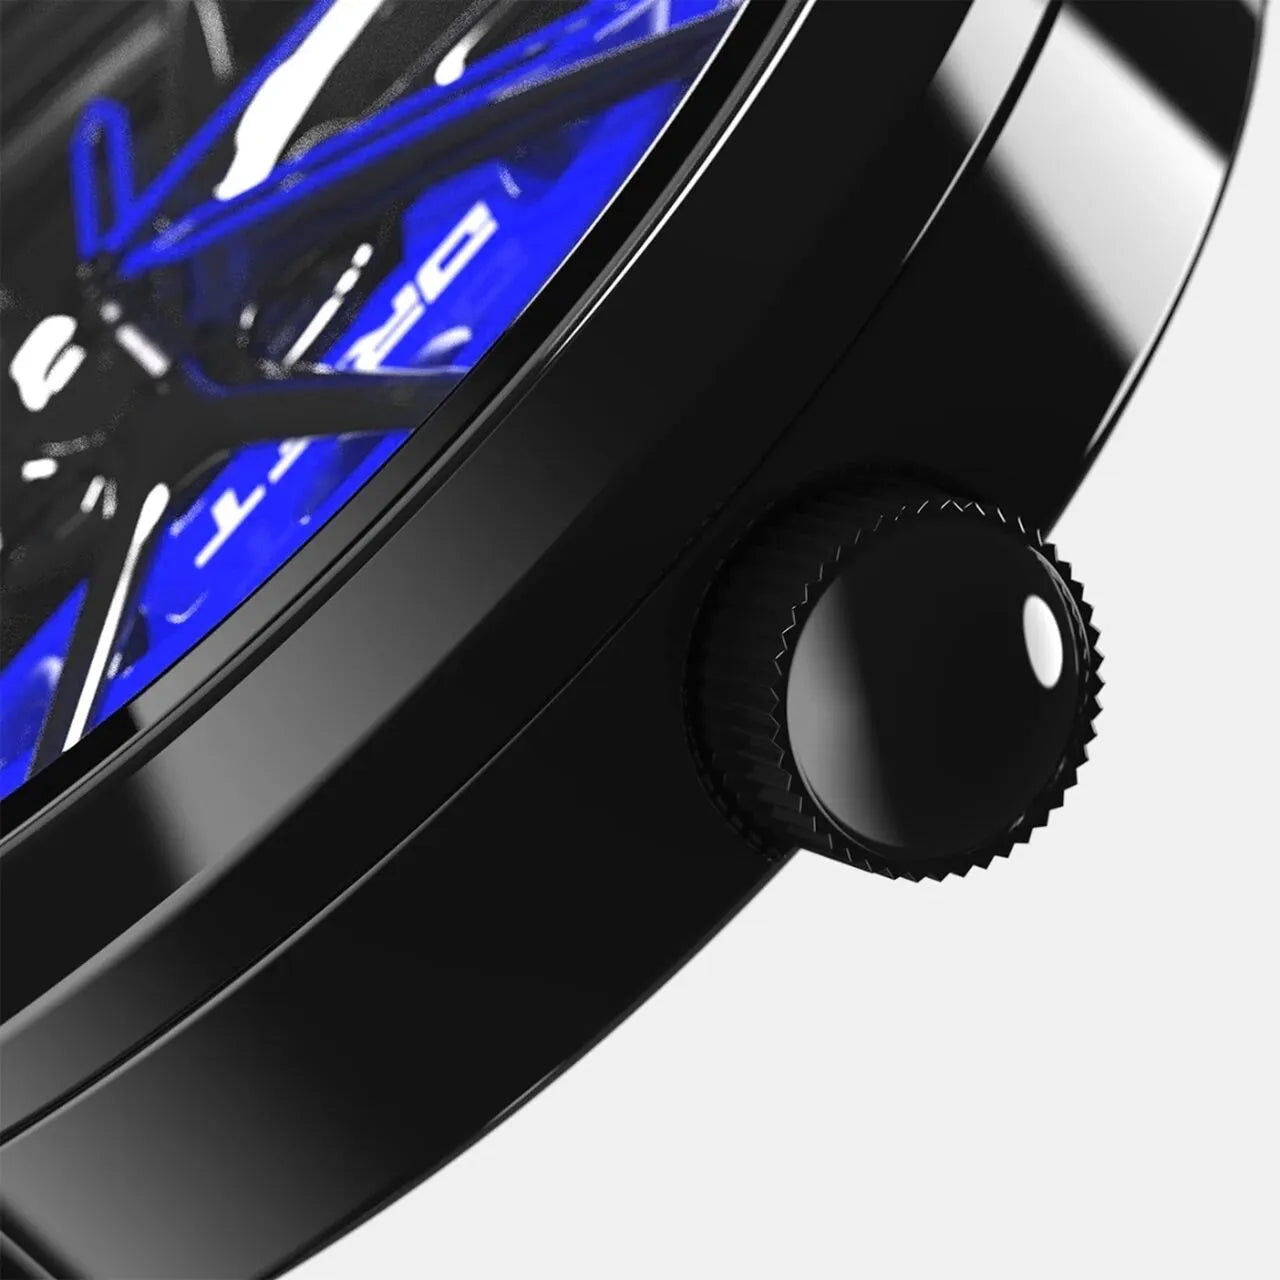 Illuminate your fashion with our bold blue Nitro Rim Watch! Precision-crafted by a German startup, these watches are aimed at motorsport, tuning, and auto aficionados. Get ready to ignite your passion! #id_46744364286282